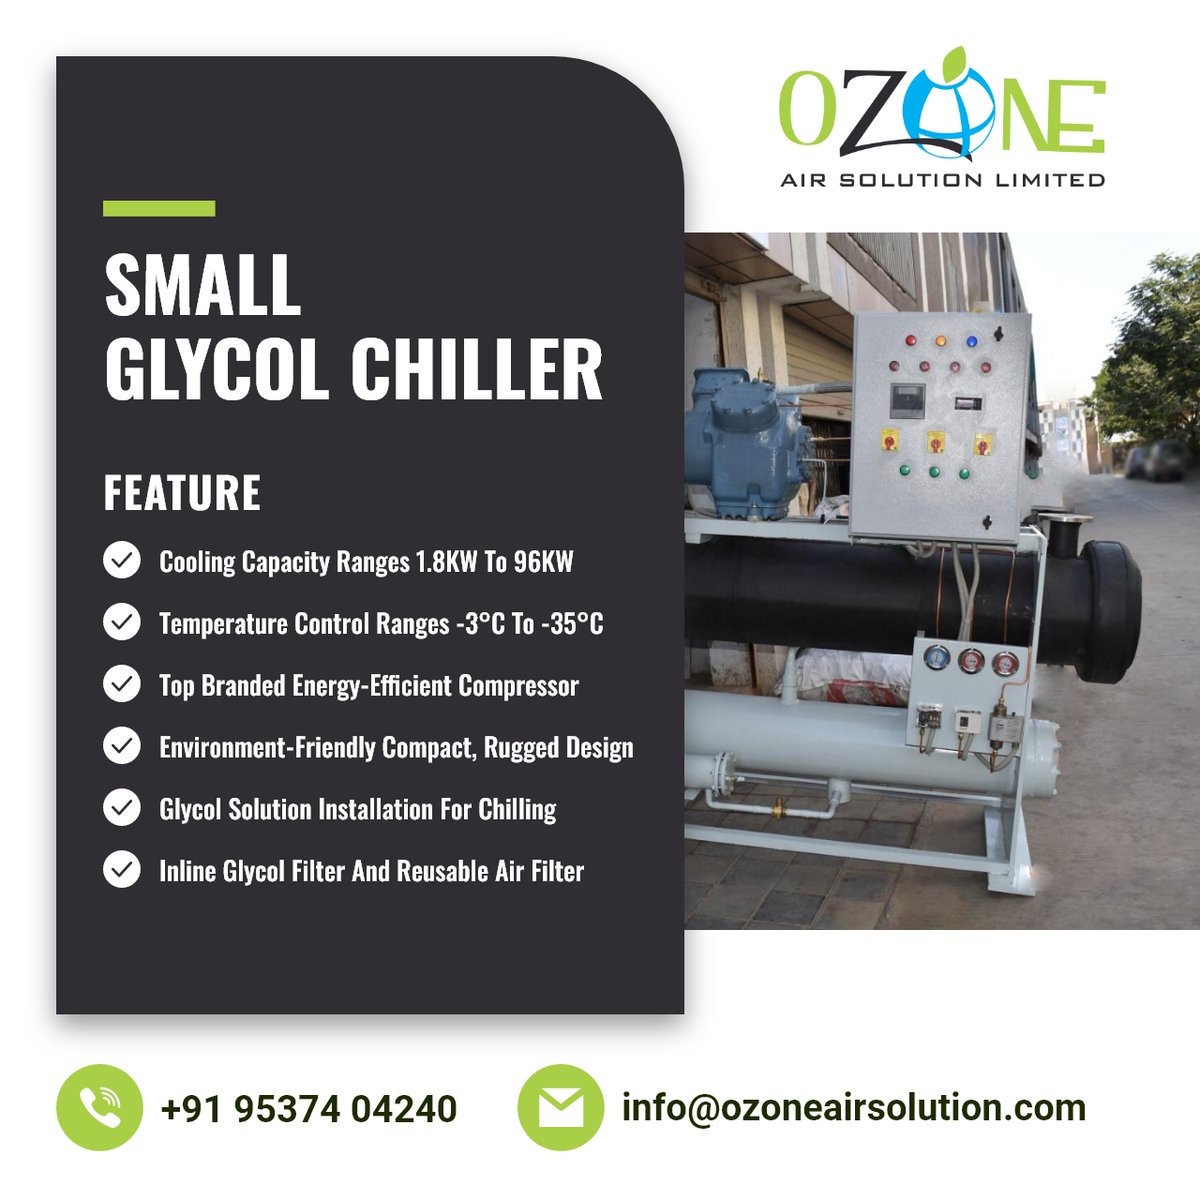 While #glycol is not as efficient of a heat transfer medium as water and also reduces pumping capabilities, it does provide freeze protection for the cooling system. @ozoneair3 
#SmallGlycolChiller #BestSmallGlycolChiller #GlycolChiller #IndustrialGlycolChiller #Chiller